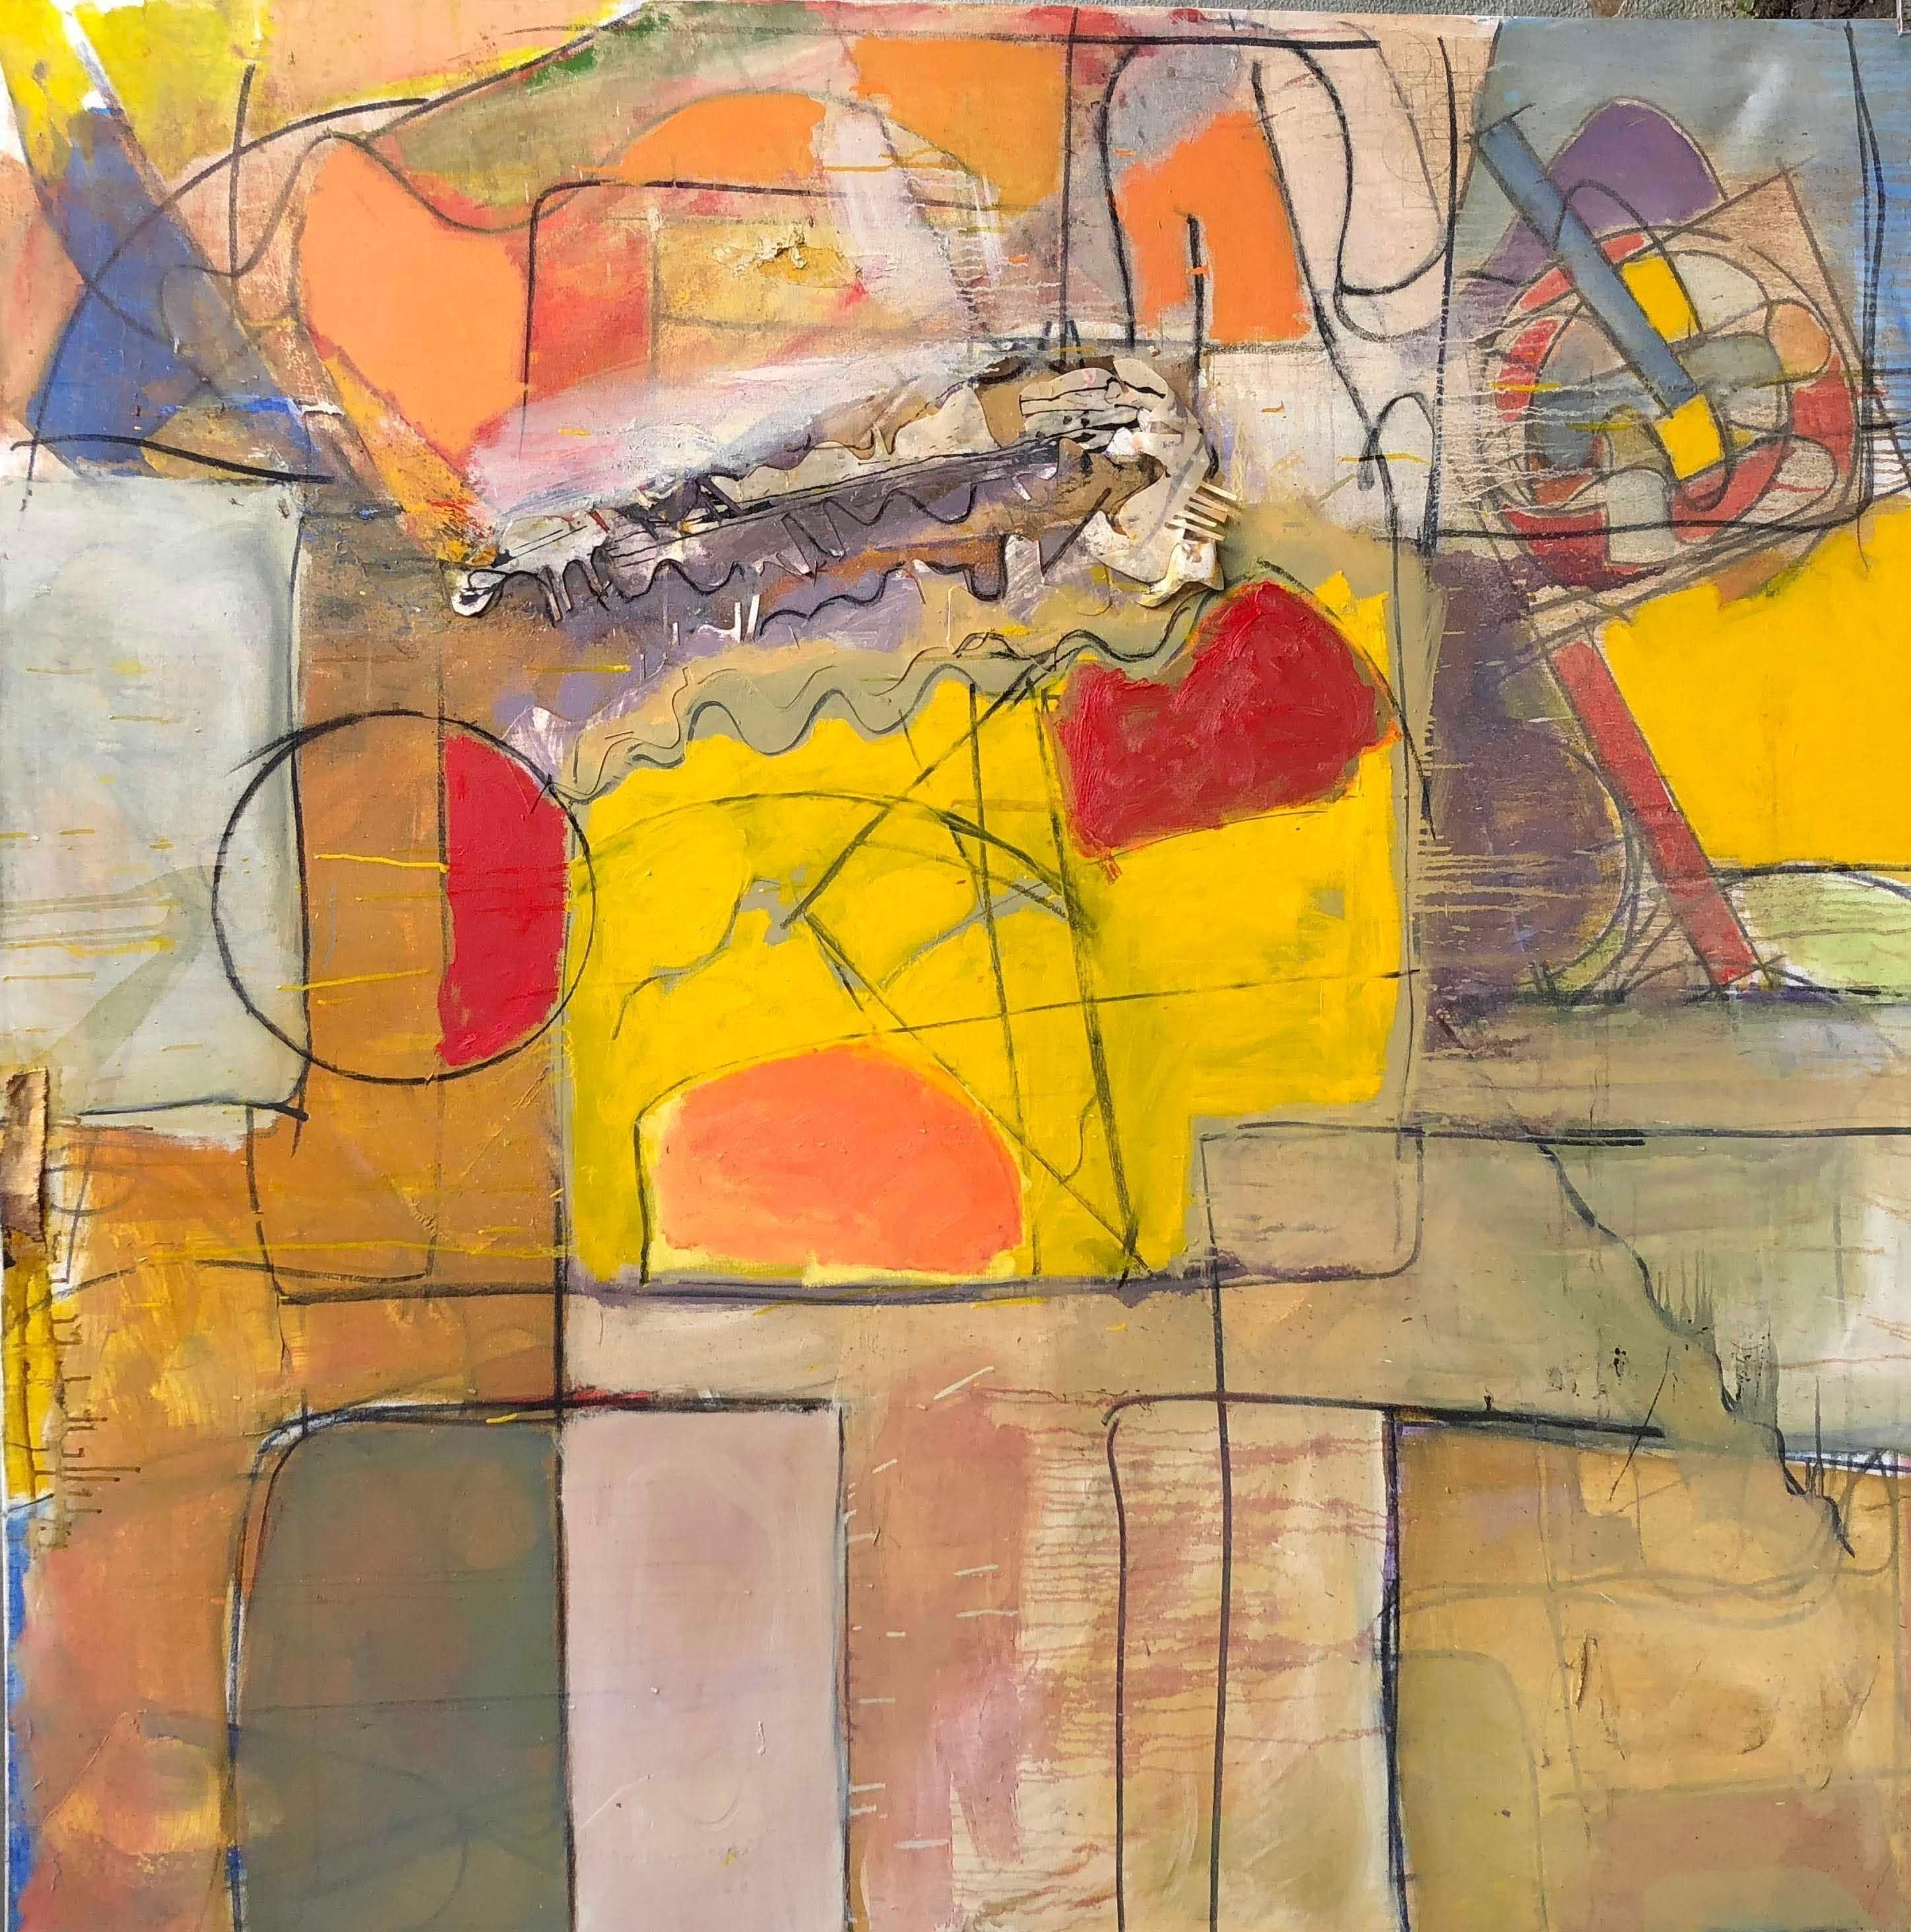 ‘Love’ Landscape, Contemporary Abstract Mixed Media On Canvas by Steven  - Mixed Media Art by Steven H. Rehfeld